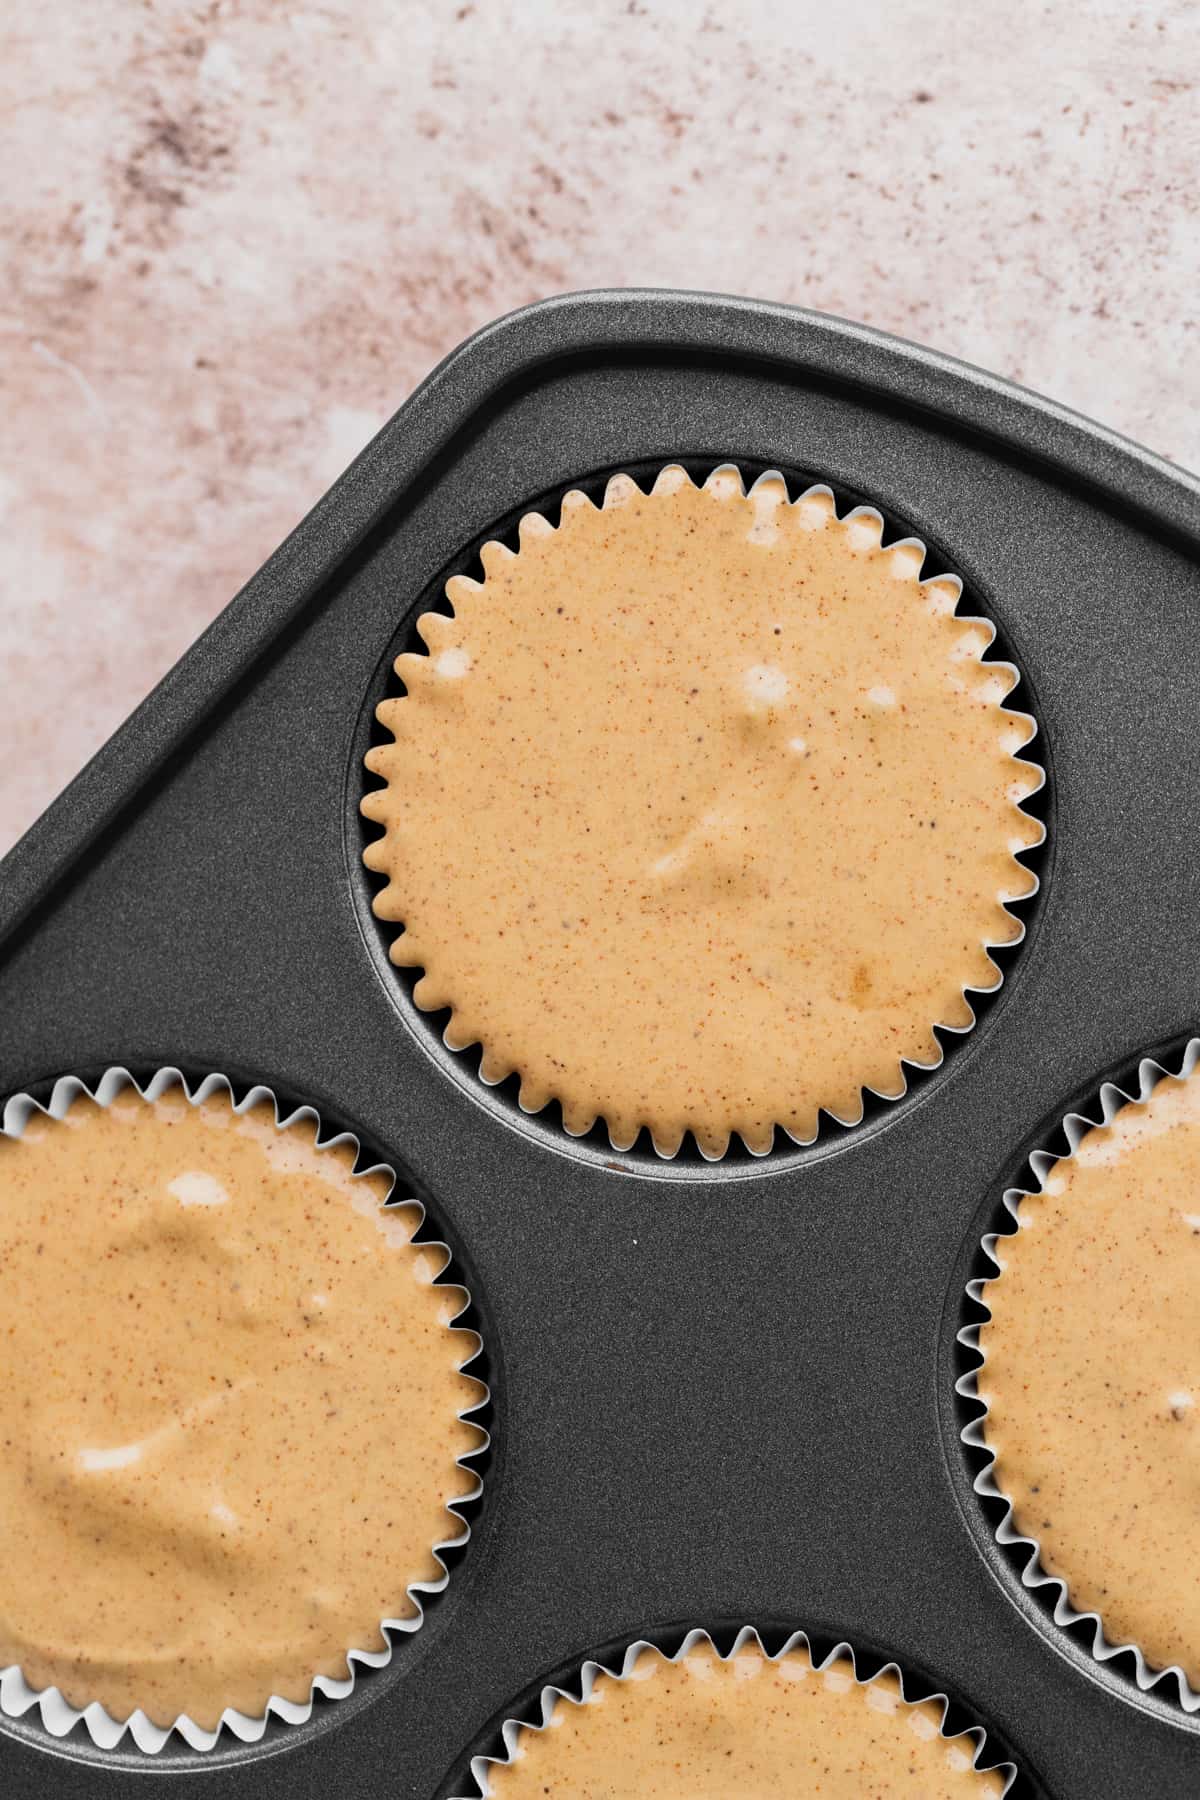 Cheesecake batter in a muffin pan.